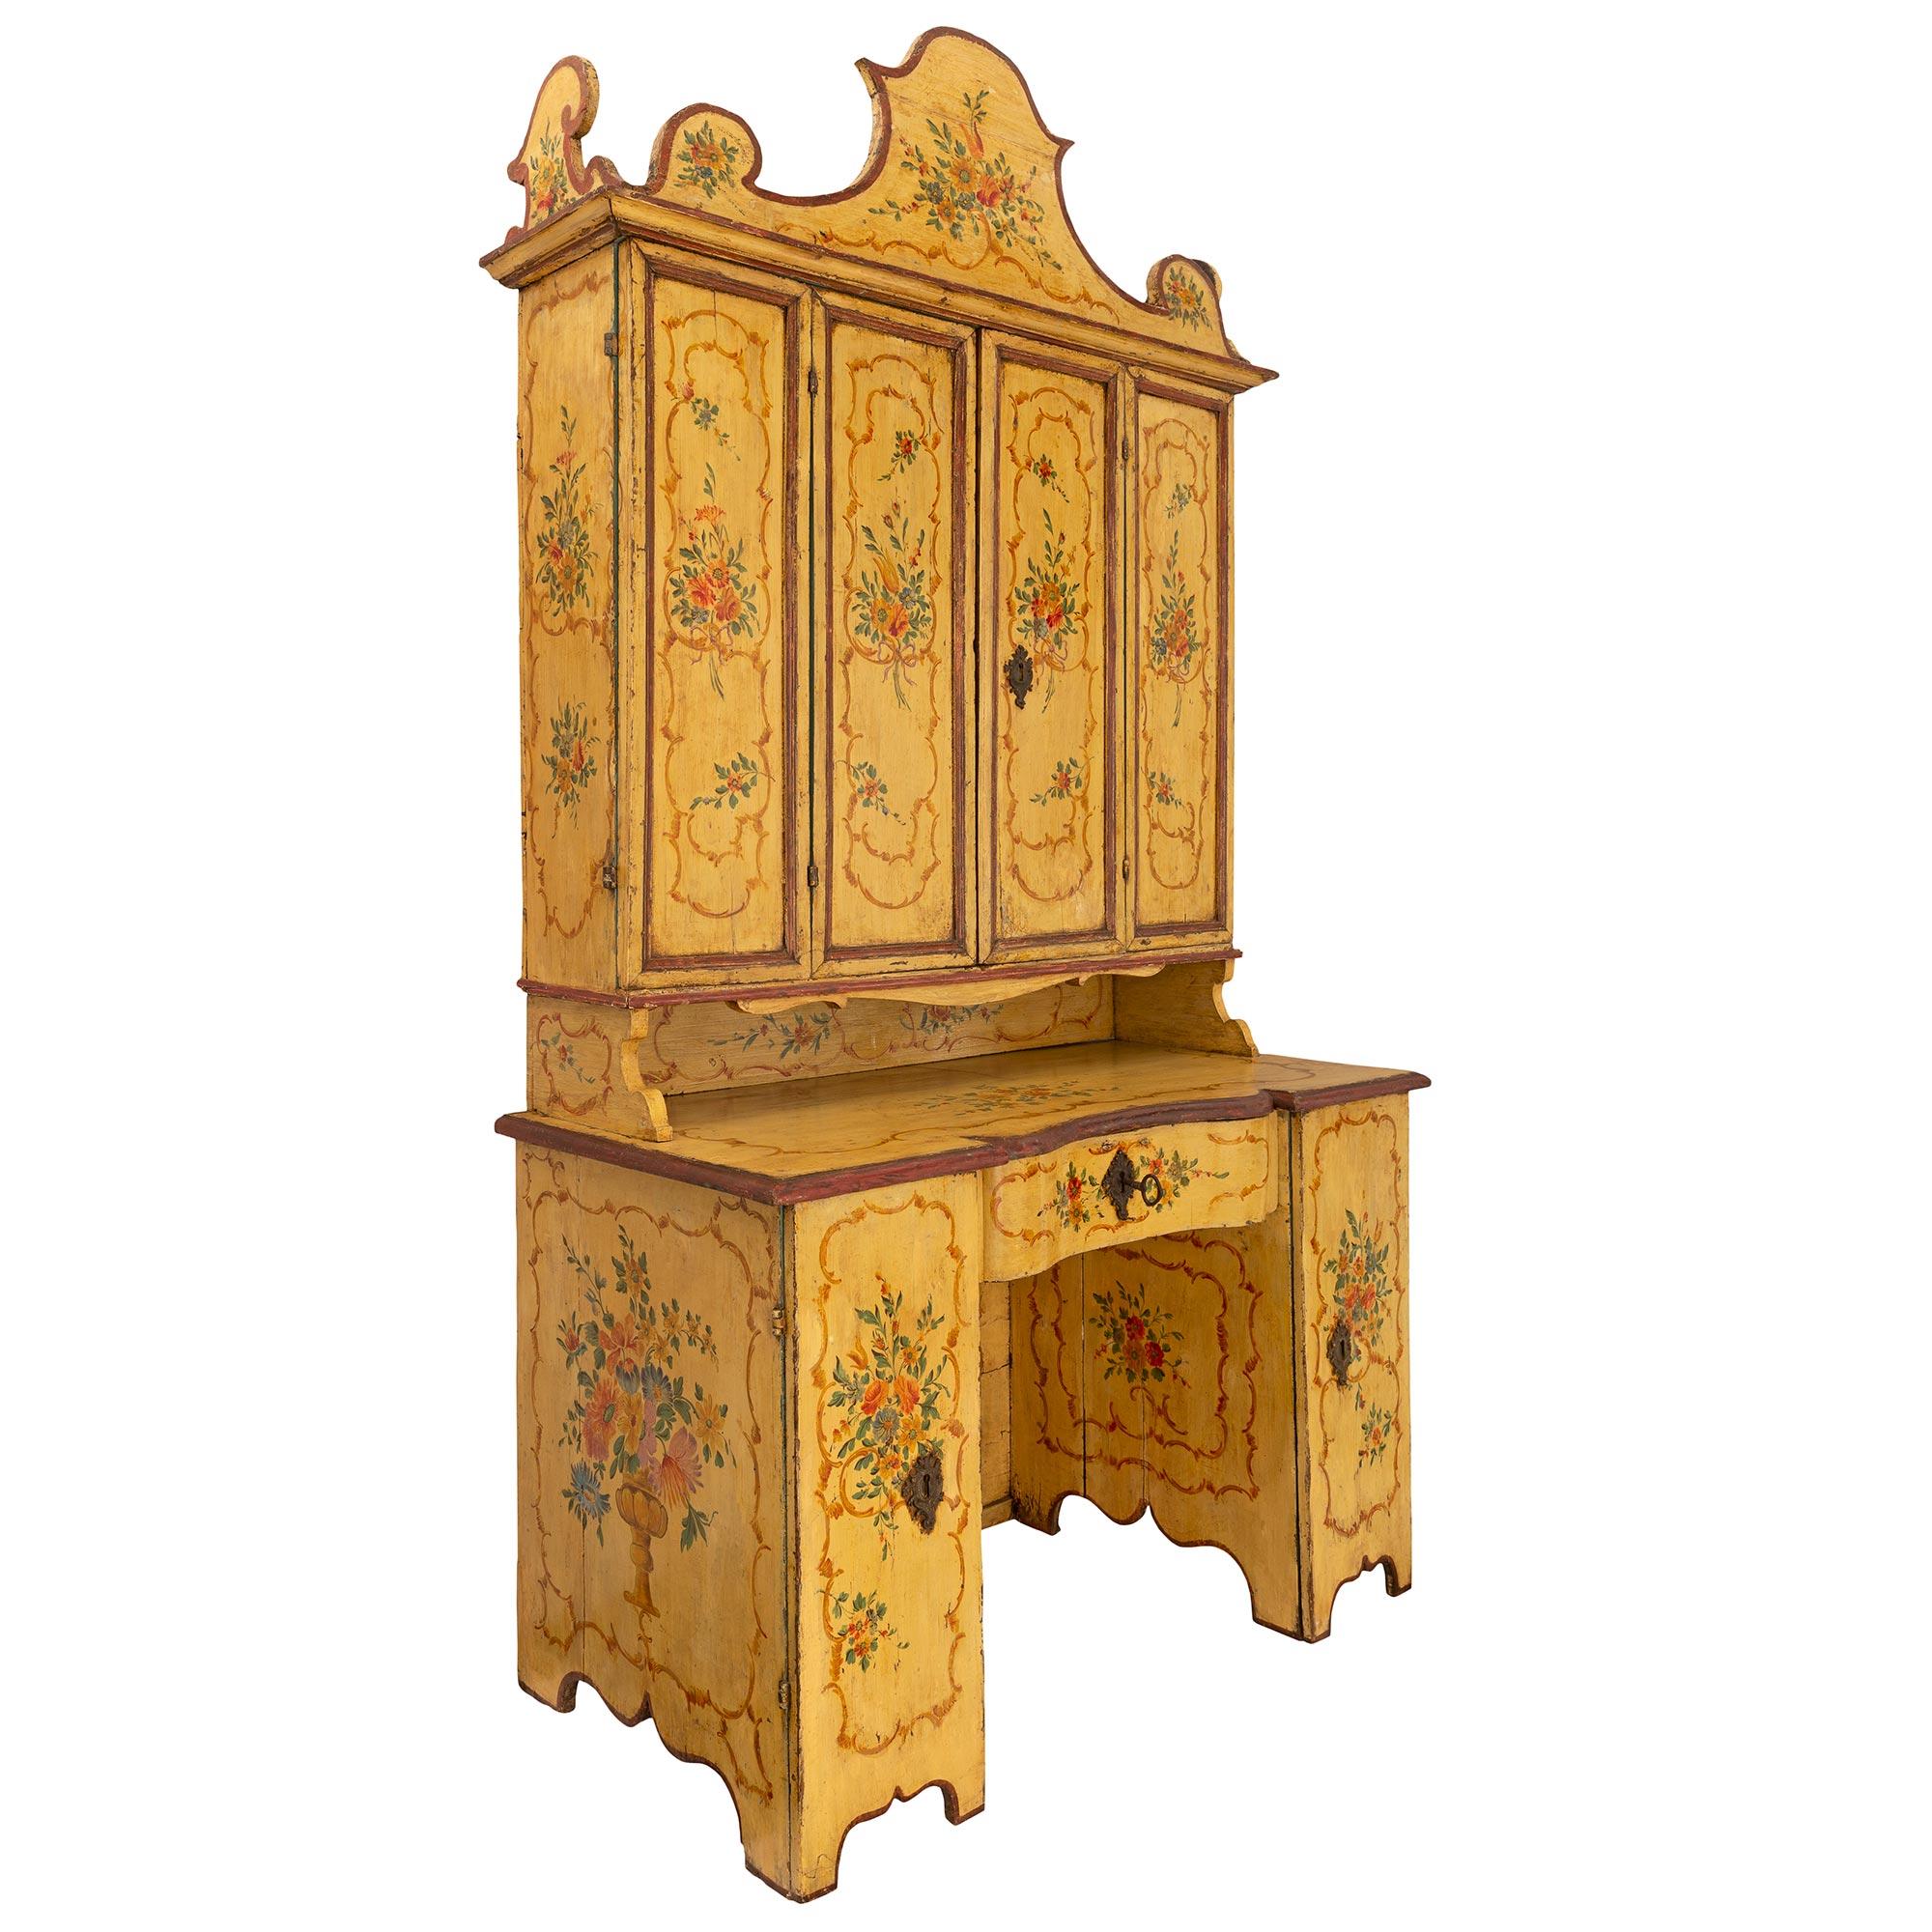 Italian Mid-18th Century Genovese St. Hand Painted Cabinet / Desk In Good Condition For Sale In West Palm Beach, FL